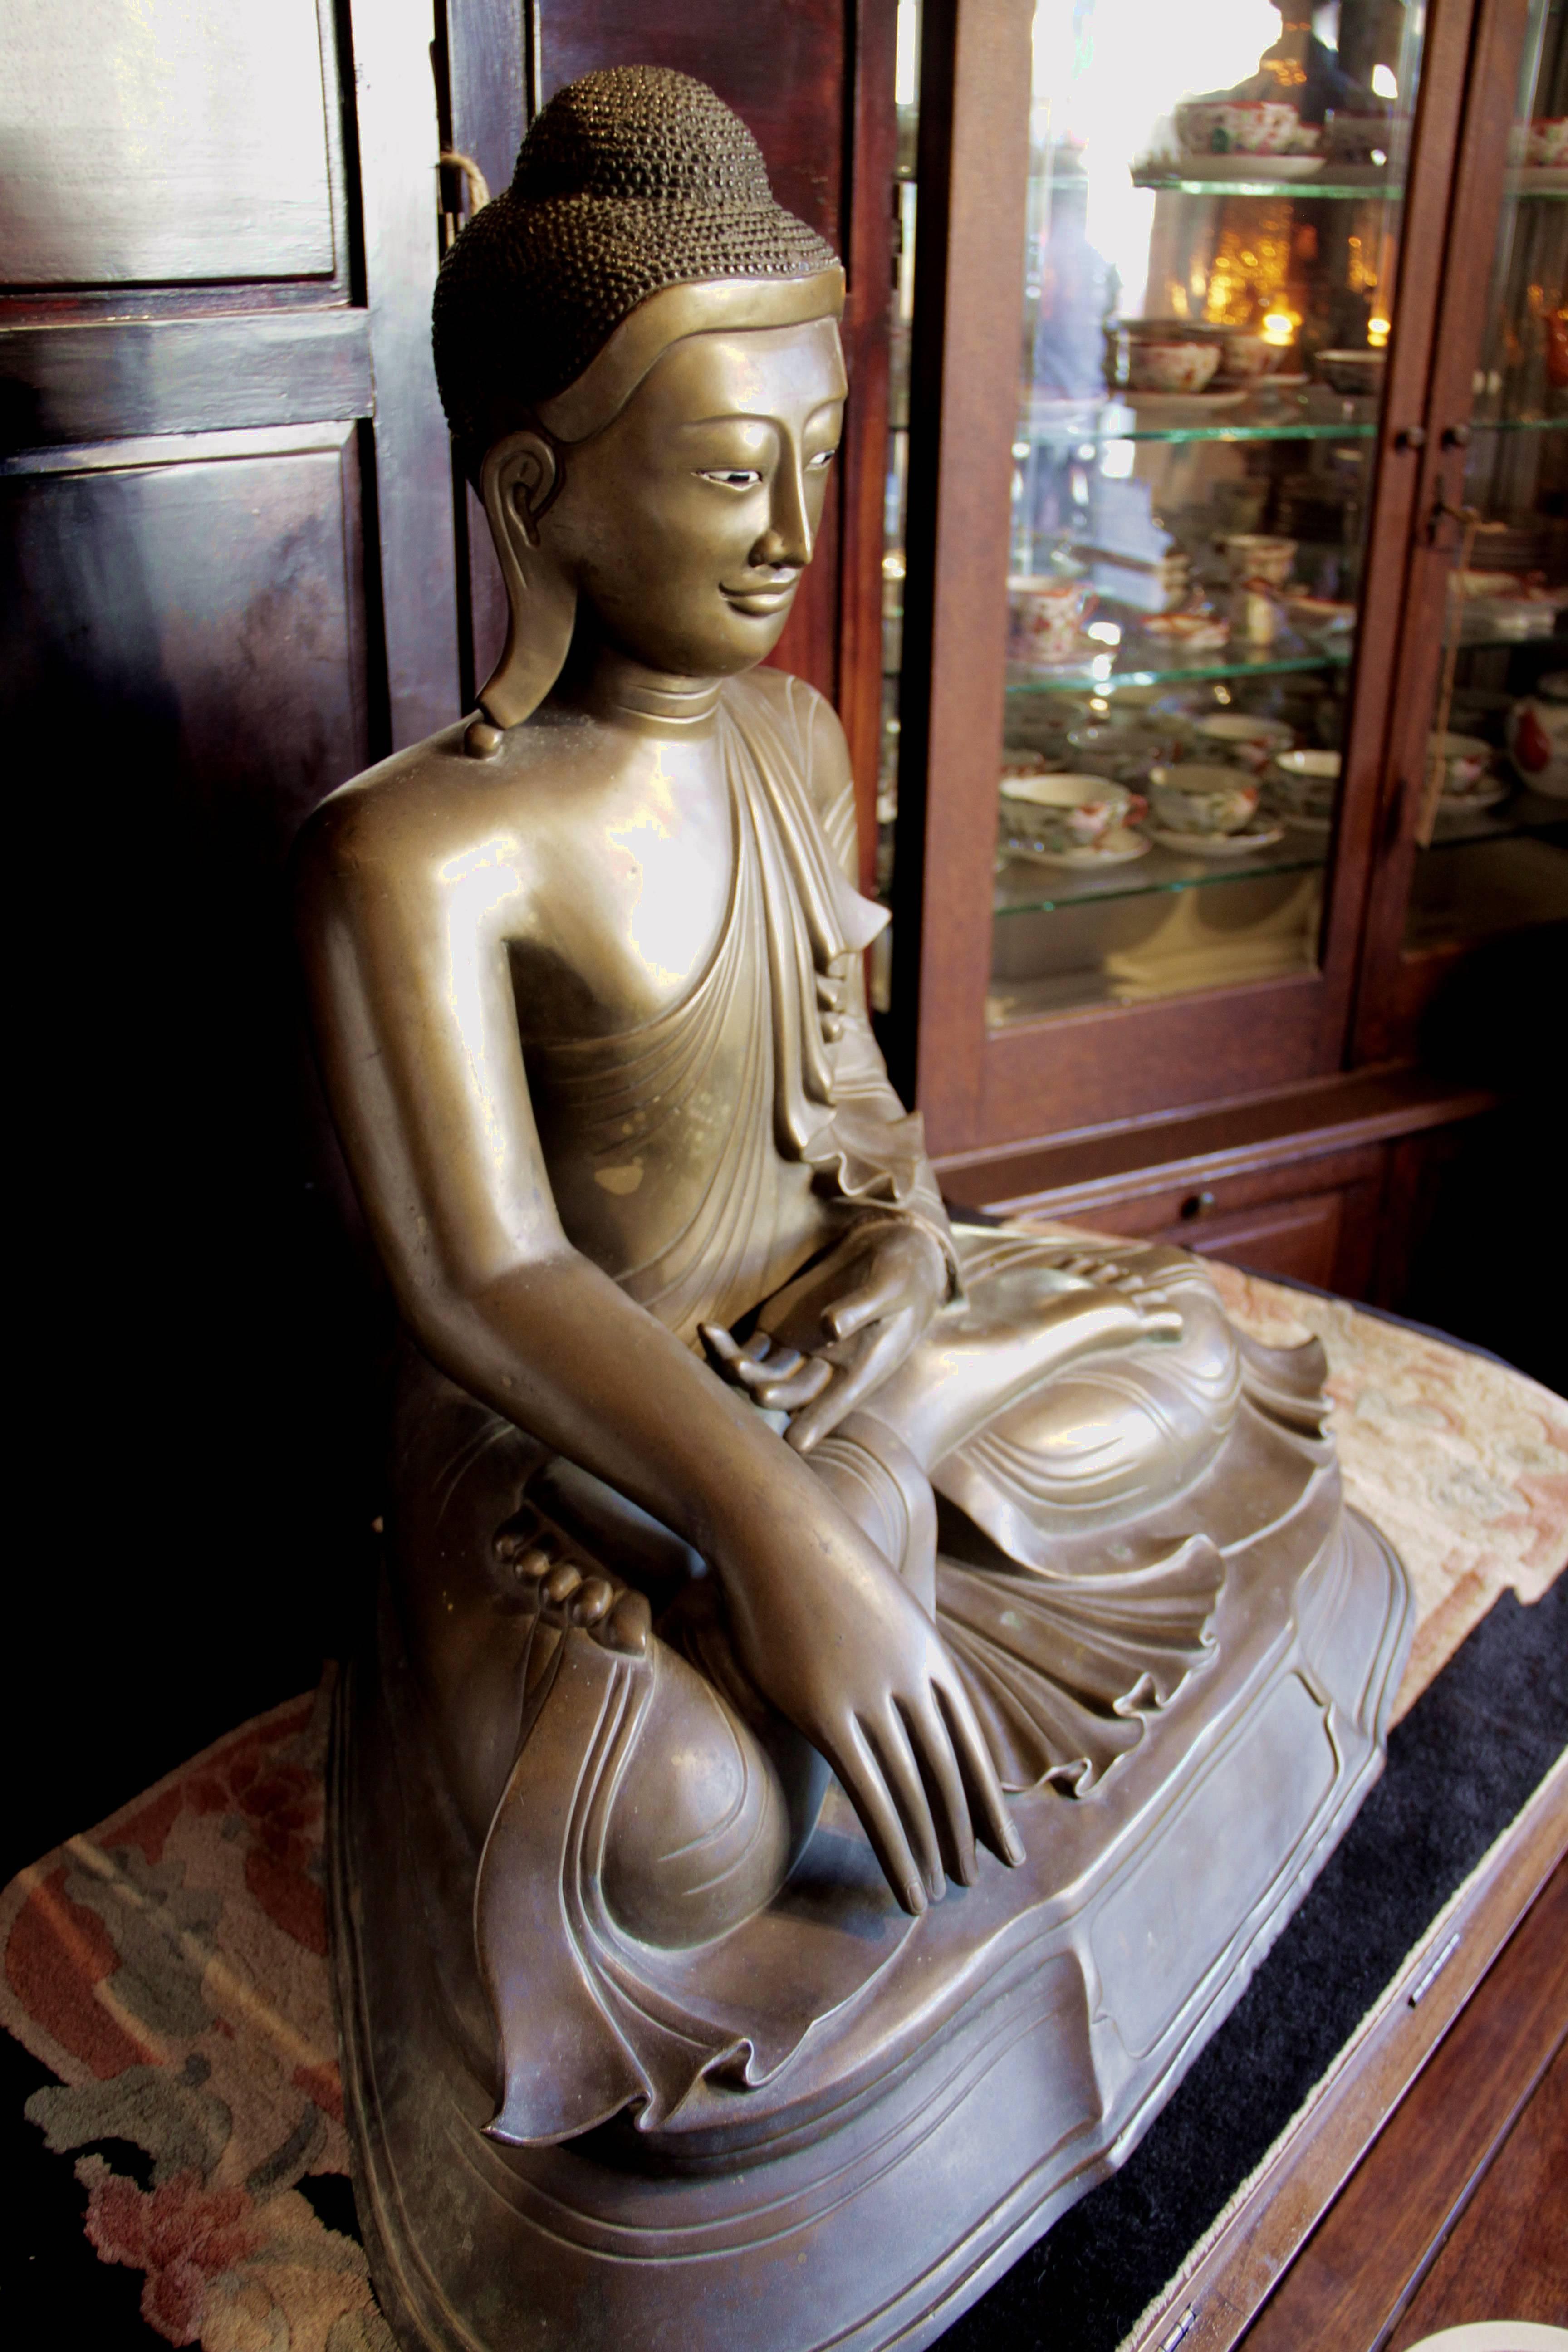 This seated Buddha statue is a Mandalay Buddha made of bronze. It is from Burma, circa 19th century.
Measures: 29 H x 31 W x 18 D.